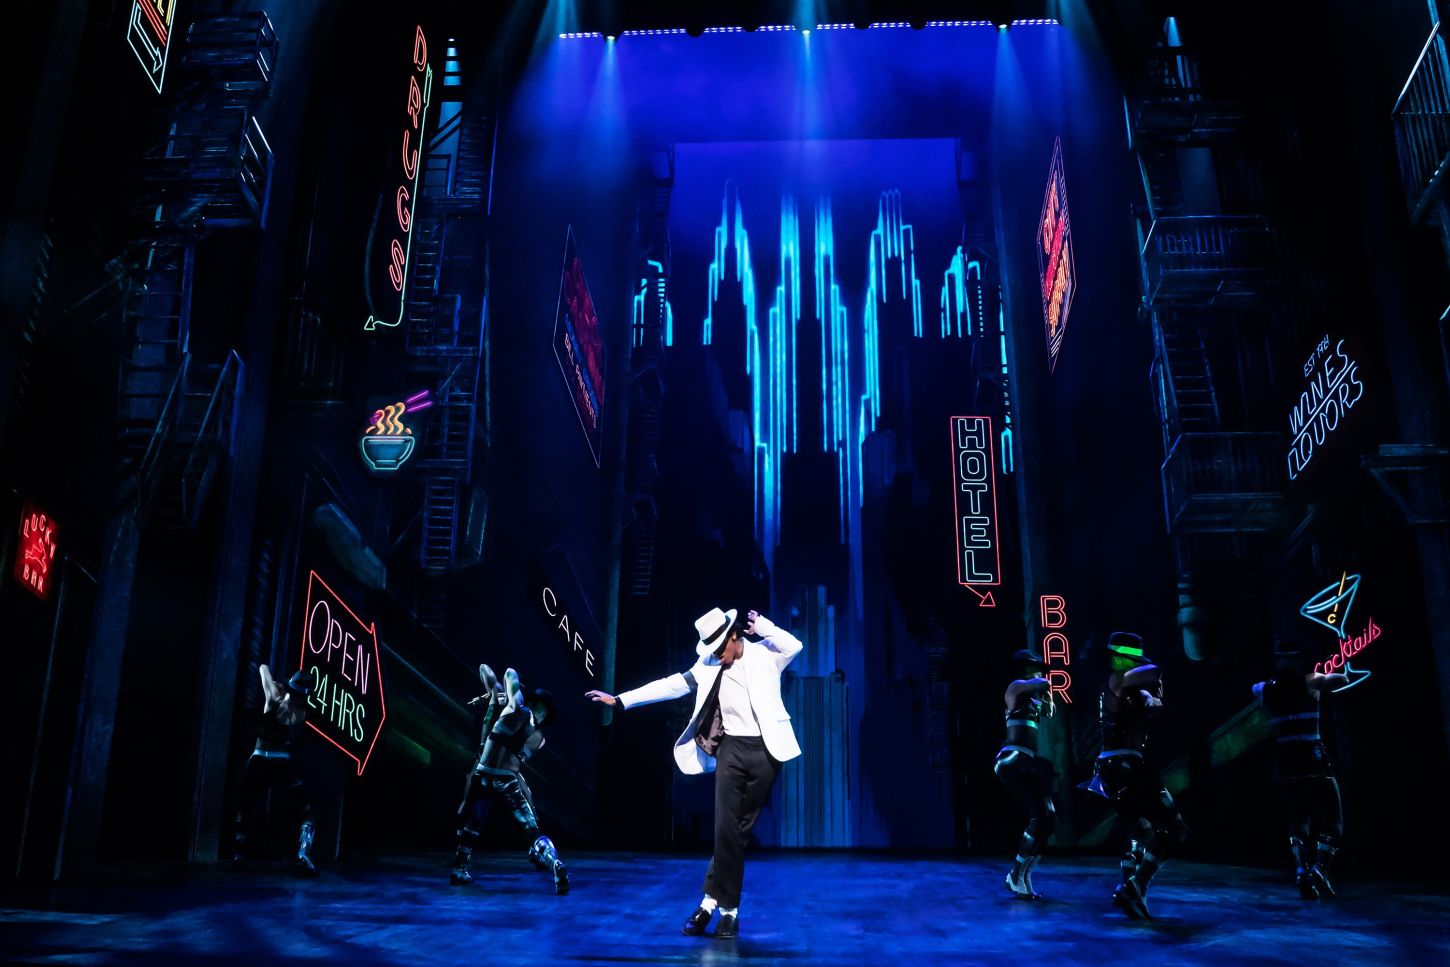 MJ - The Musical